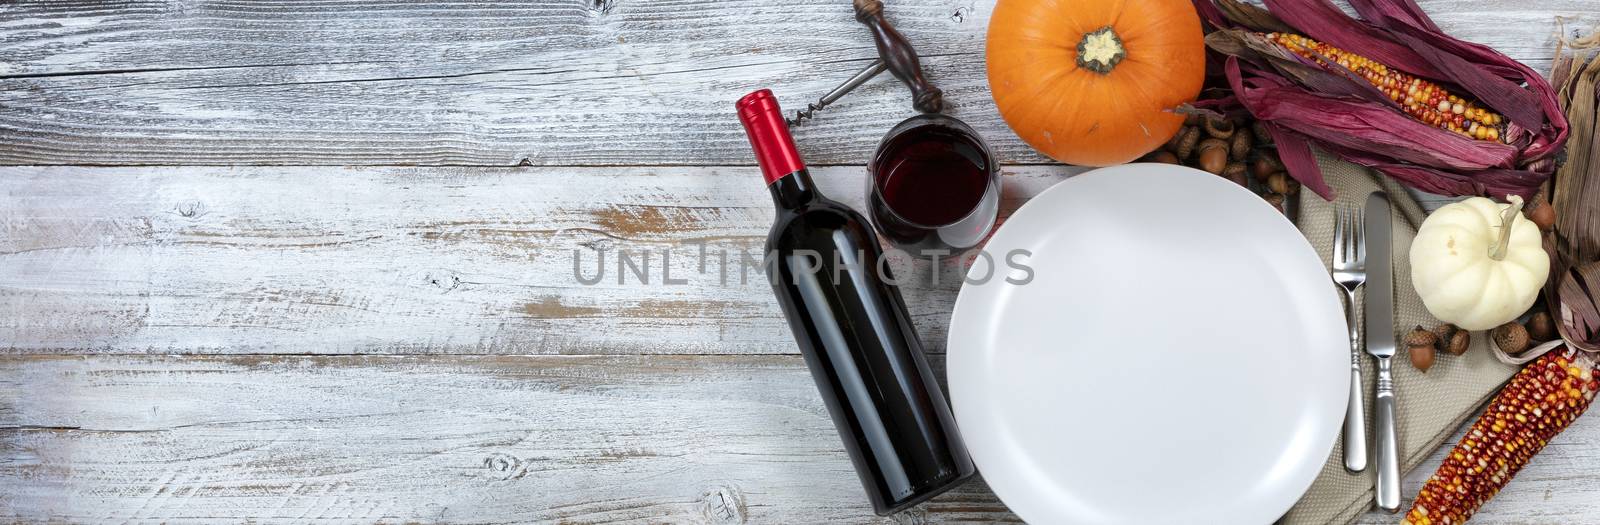 White rustic dinner table prepared for Thanksgiving meal with copy space available